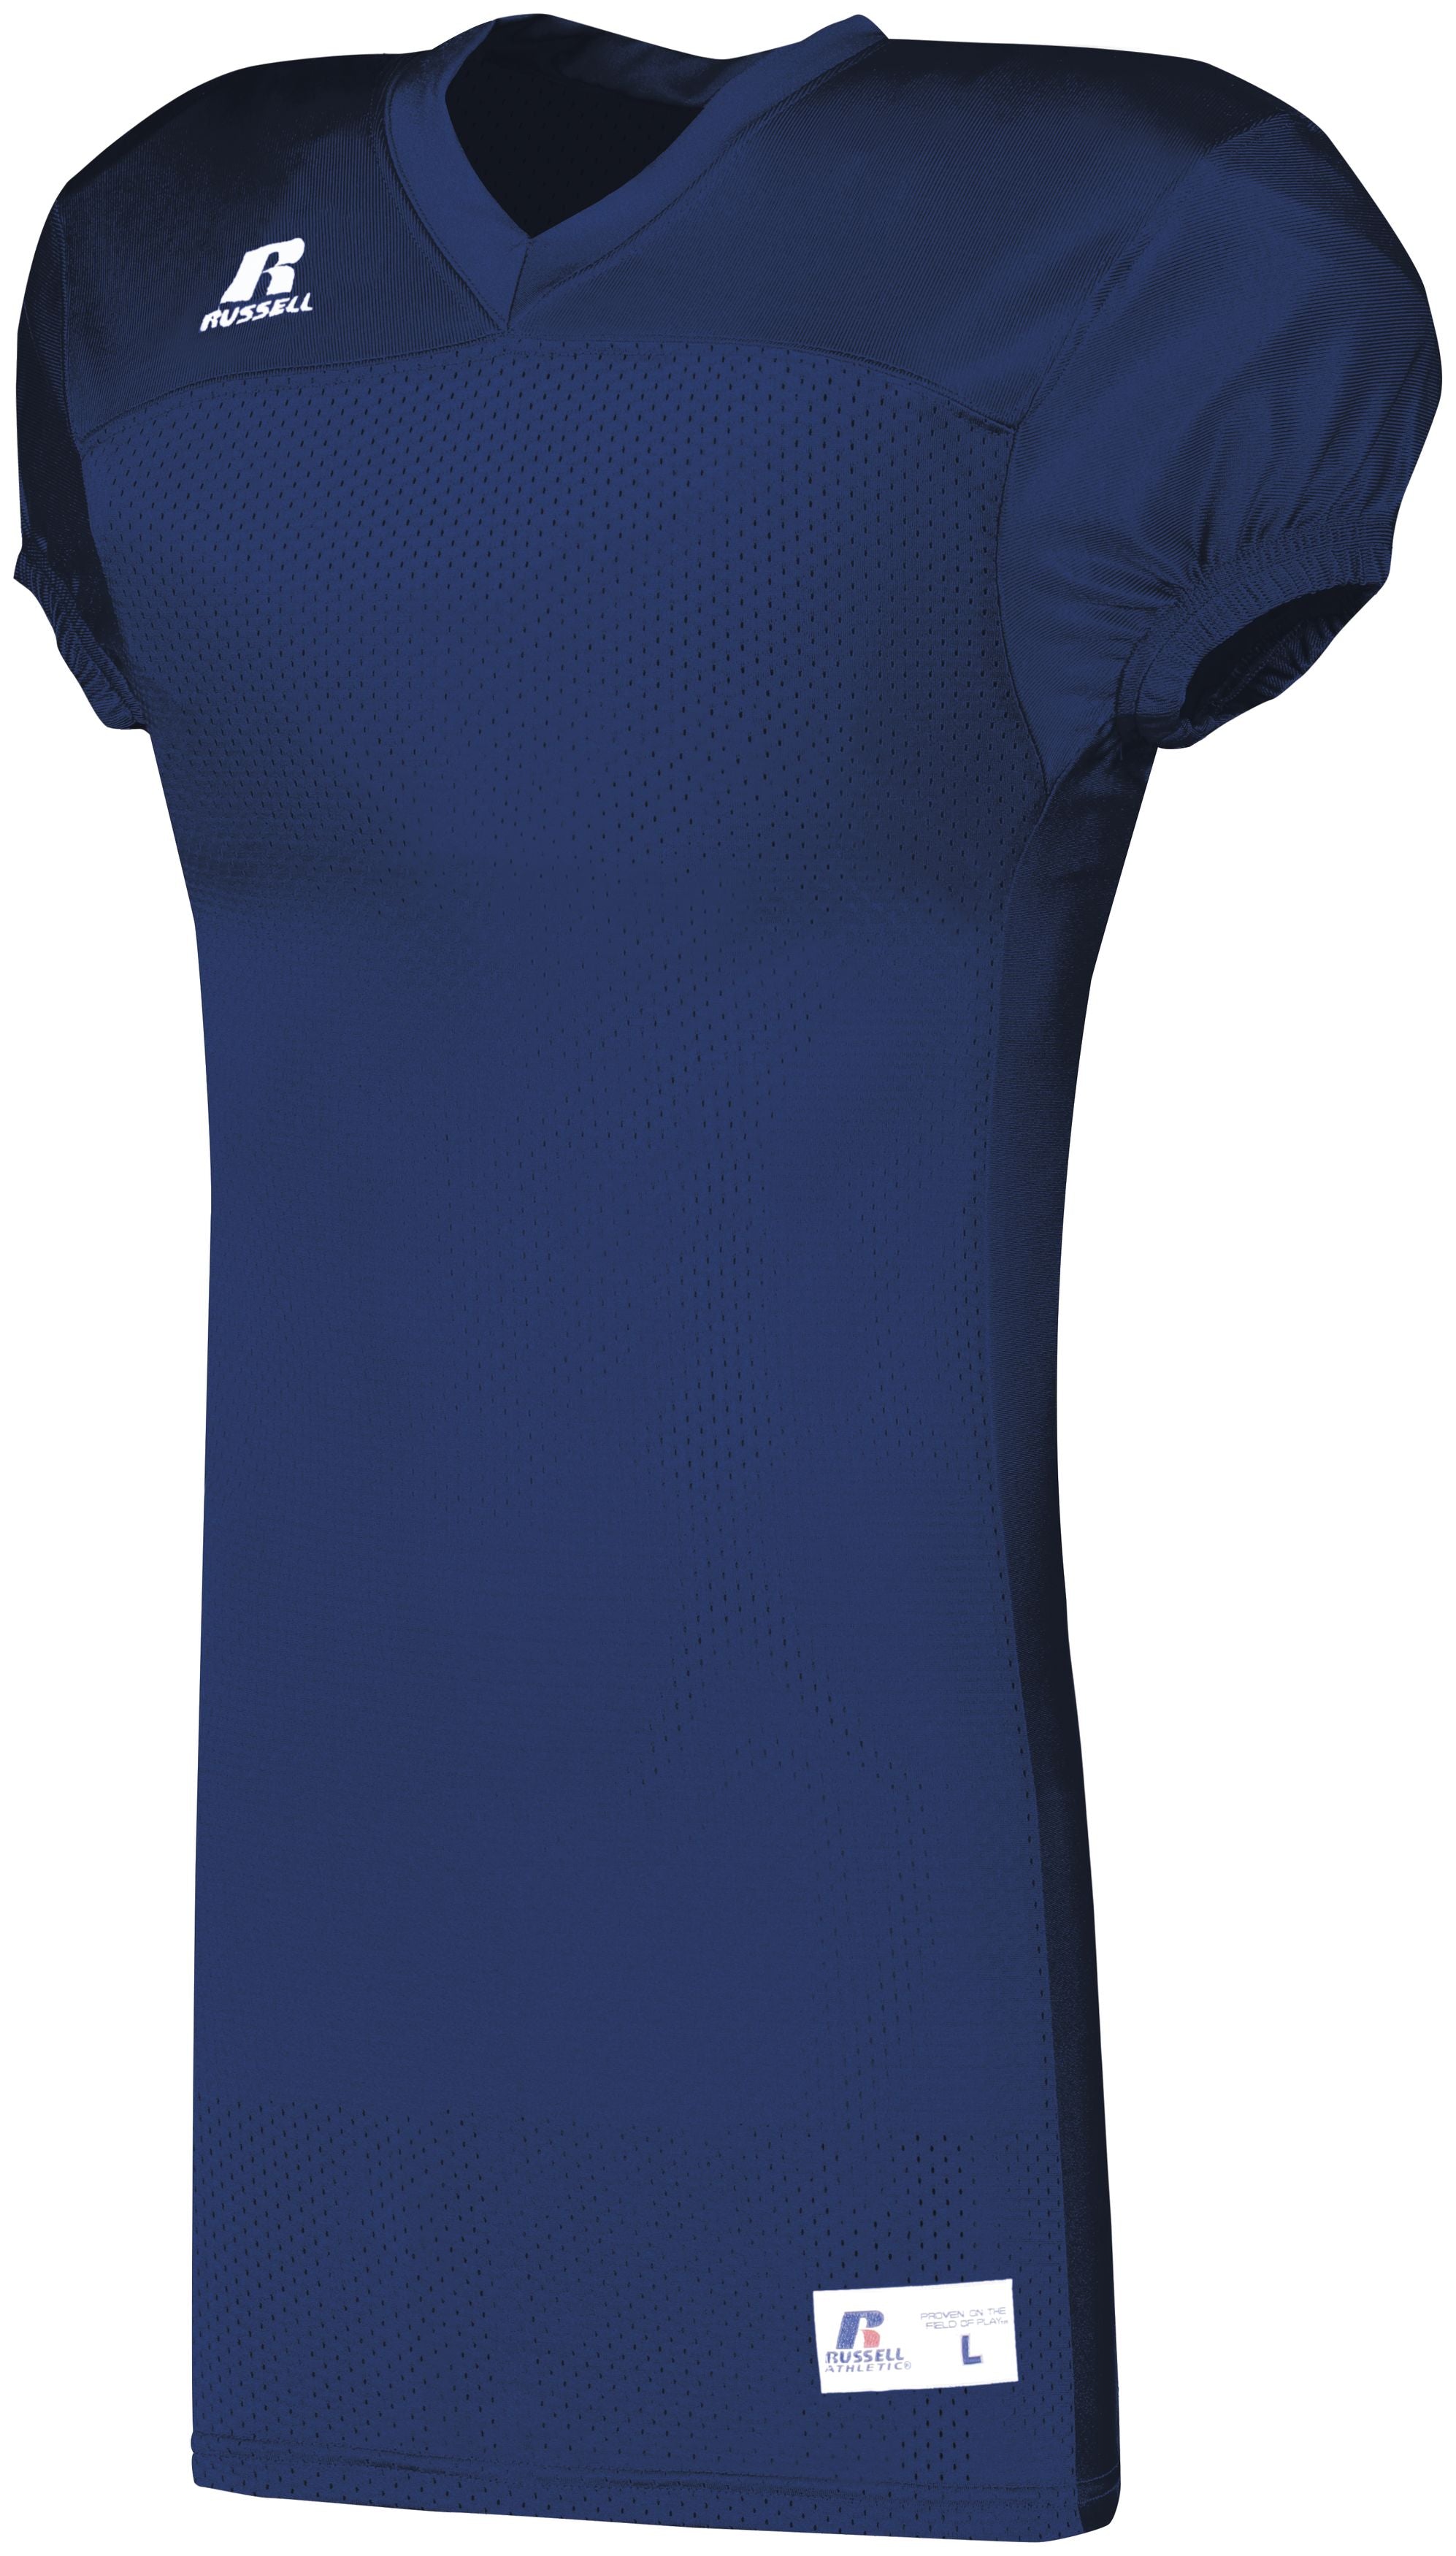 Russell Athletic Solid Jersey With Side Inserts in Navy  -Part of the Adult, Adult-Jersey, Football, Russell-Athletic-Products, Shirts, All-Sports, All-Sports-1 product lines at KanaleyCreations.com